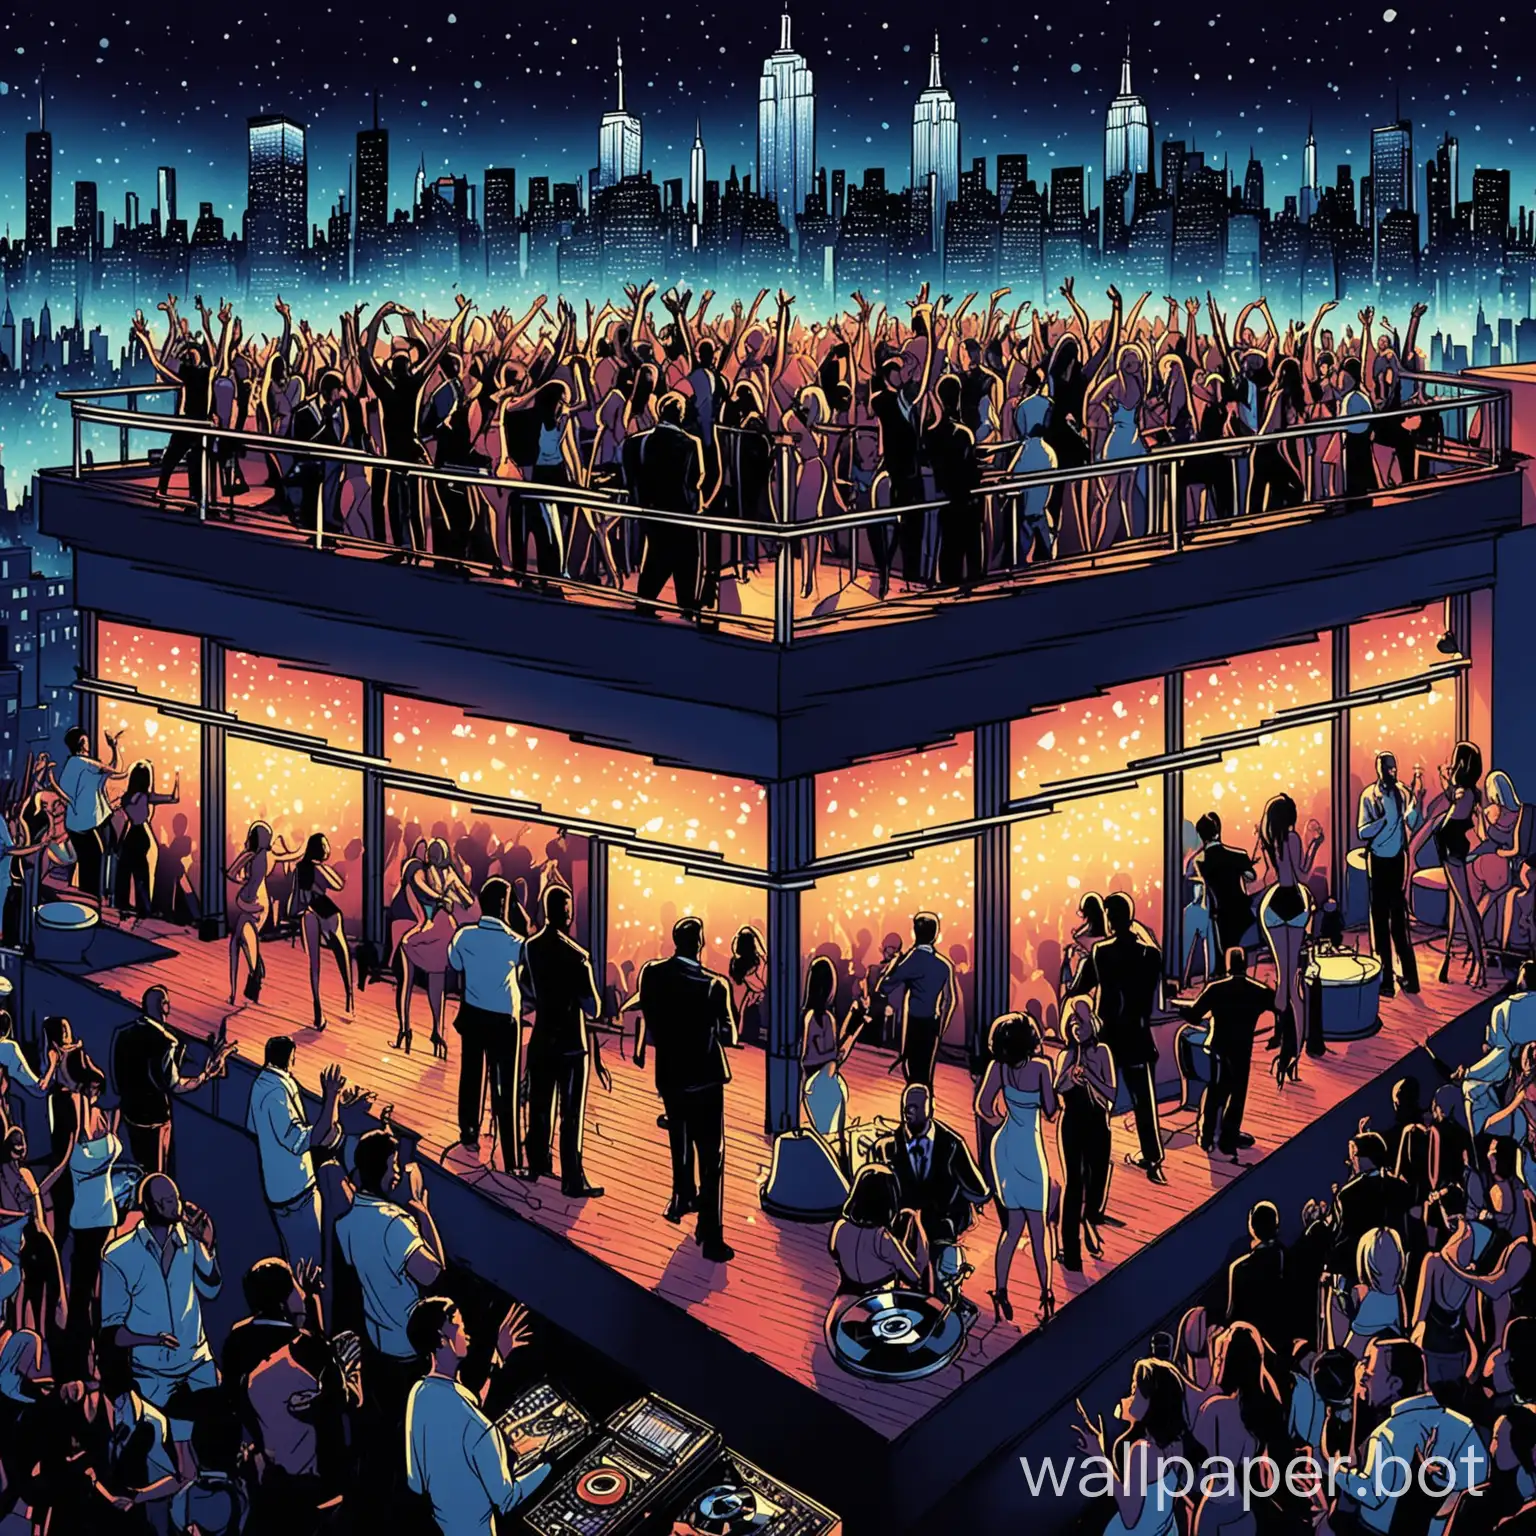 Create a New York Night club with busy crowd  on a Roof Top with House music - illustration  